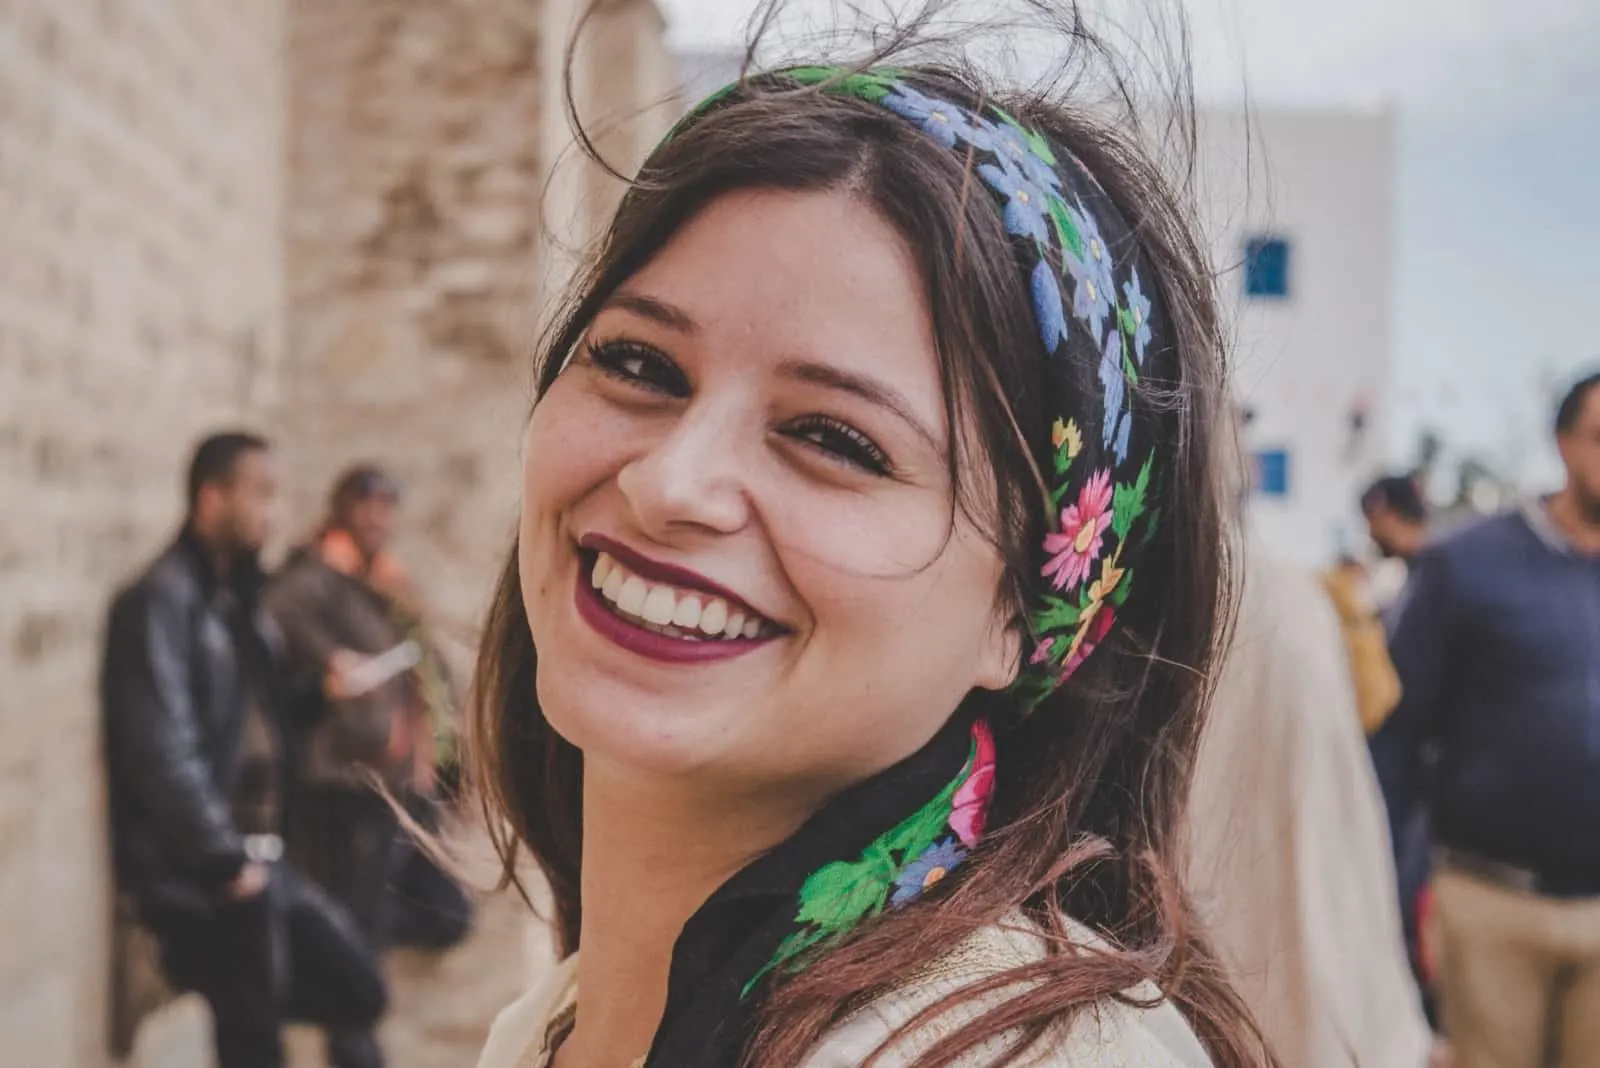 woman with printed head scarf smiling